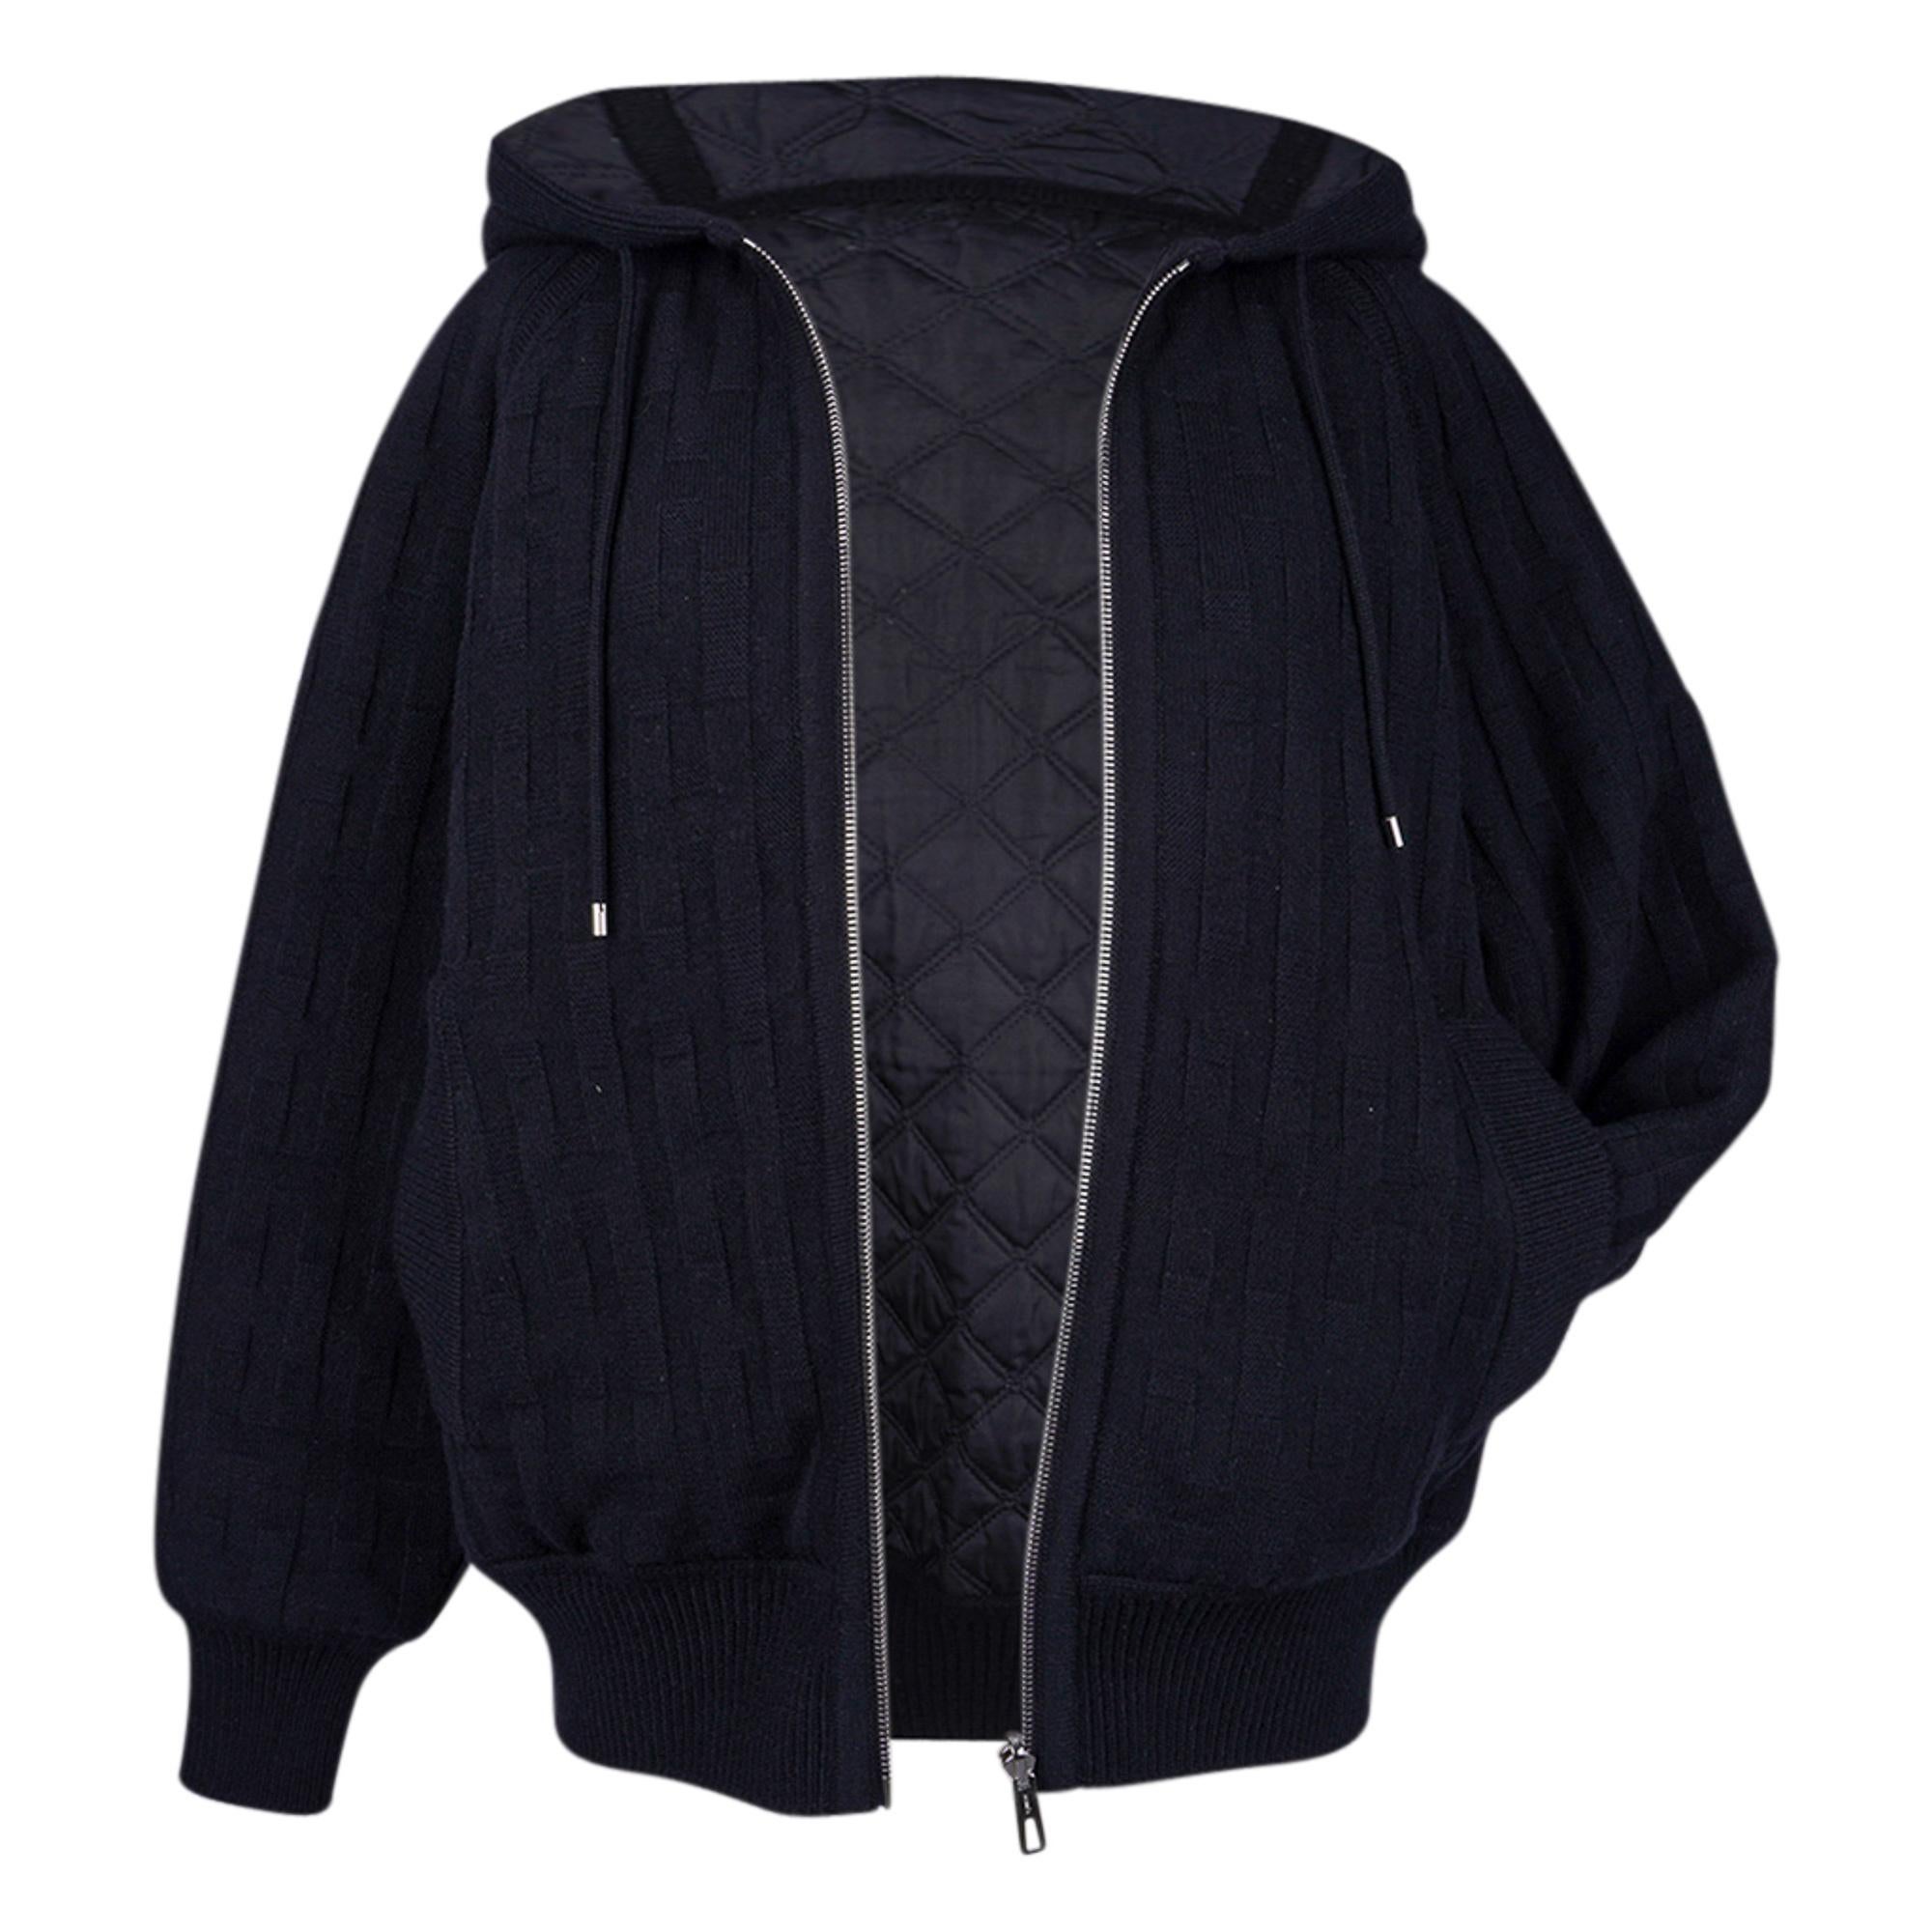 Mightychic offers an Hermès Reversible Zip Cardigan featured in Black on Black.
Warm with hood and quilted cotton, wool and plume canvas.
Virgin wool with Losanges and H motifs.
Reverses to wadded brown quilted side with ribbed waist and